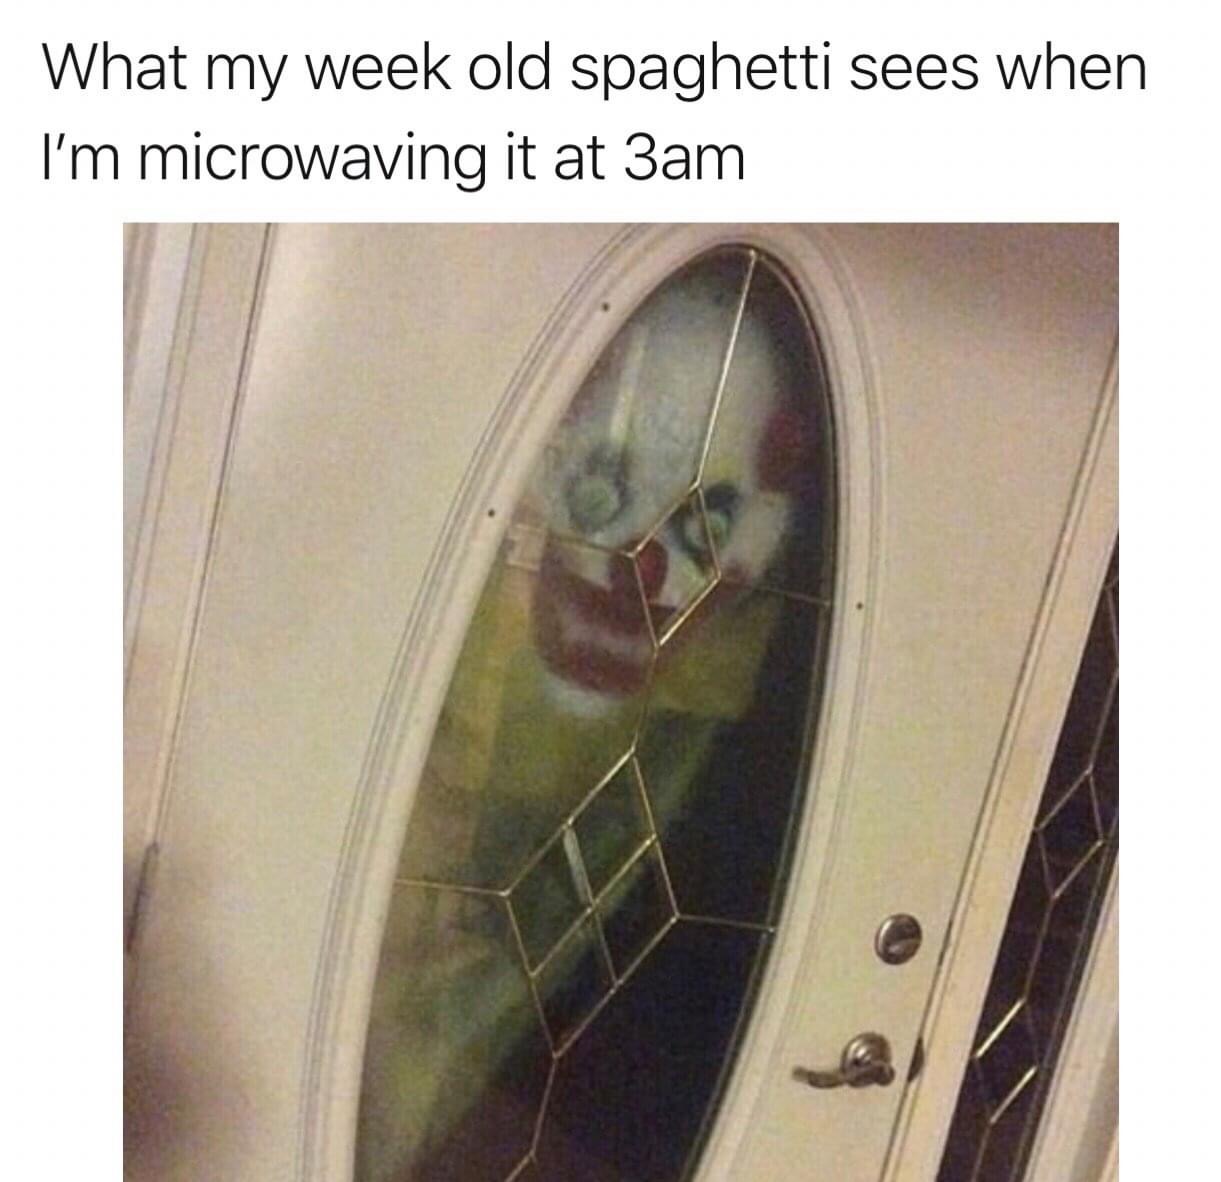 my week old spaghetti sees - What my week old spaghetti sees when I'm microwaving it at 3am